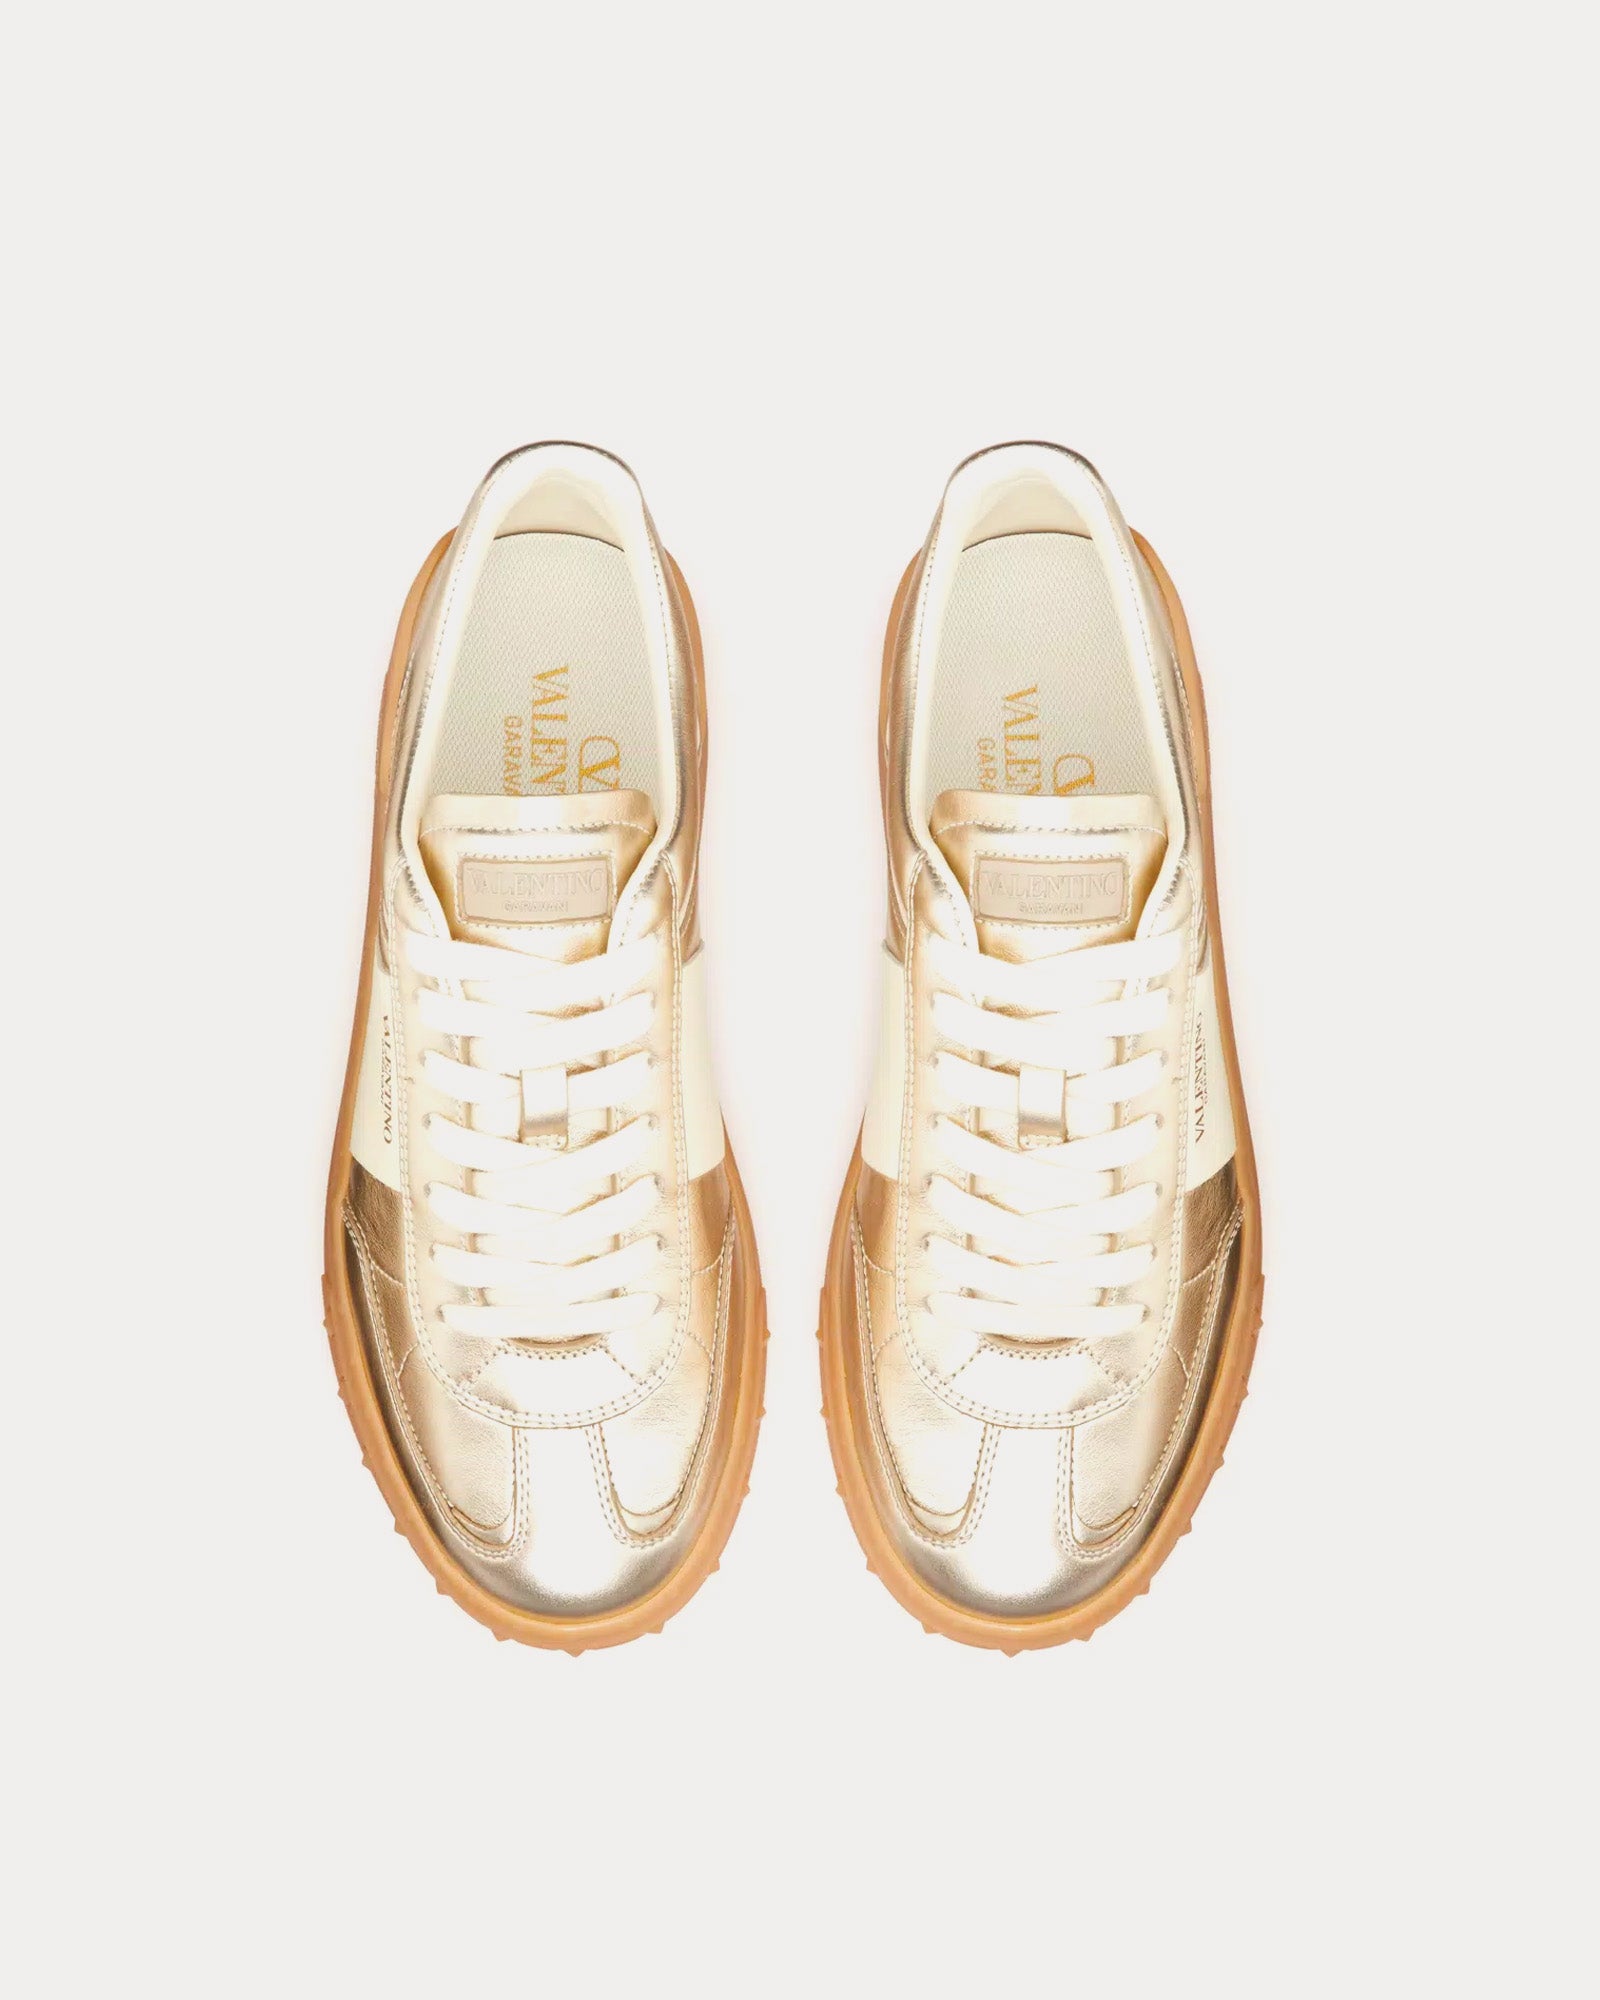 Valentino - Upvillage Laminated Calfskin Leather Platinum / Ivory / Amber Low Top Sneakers